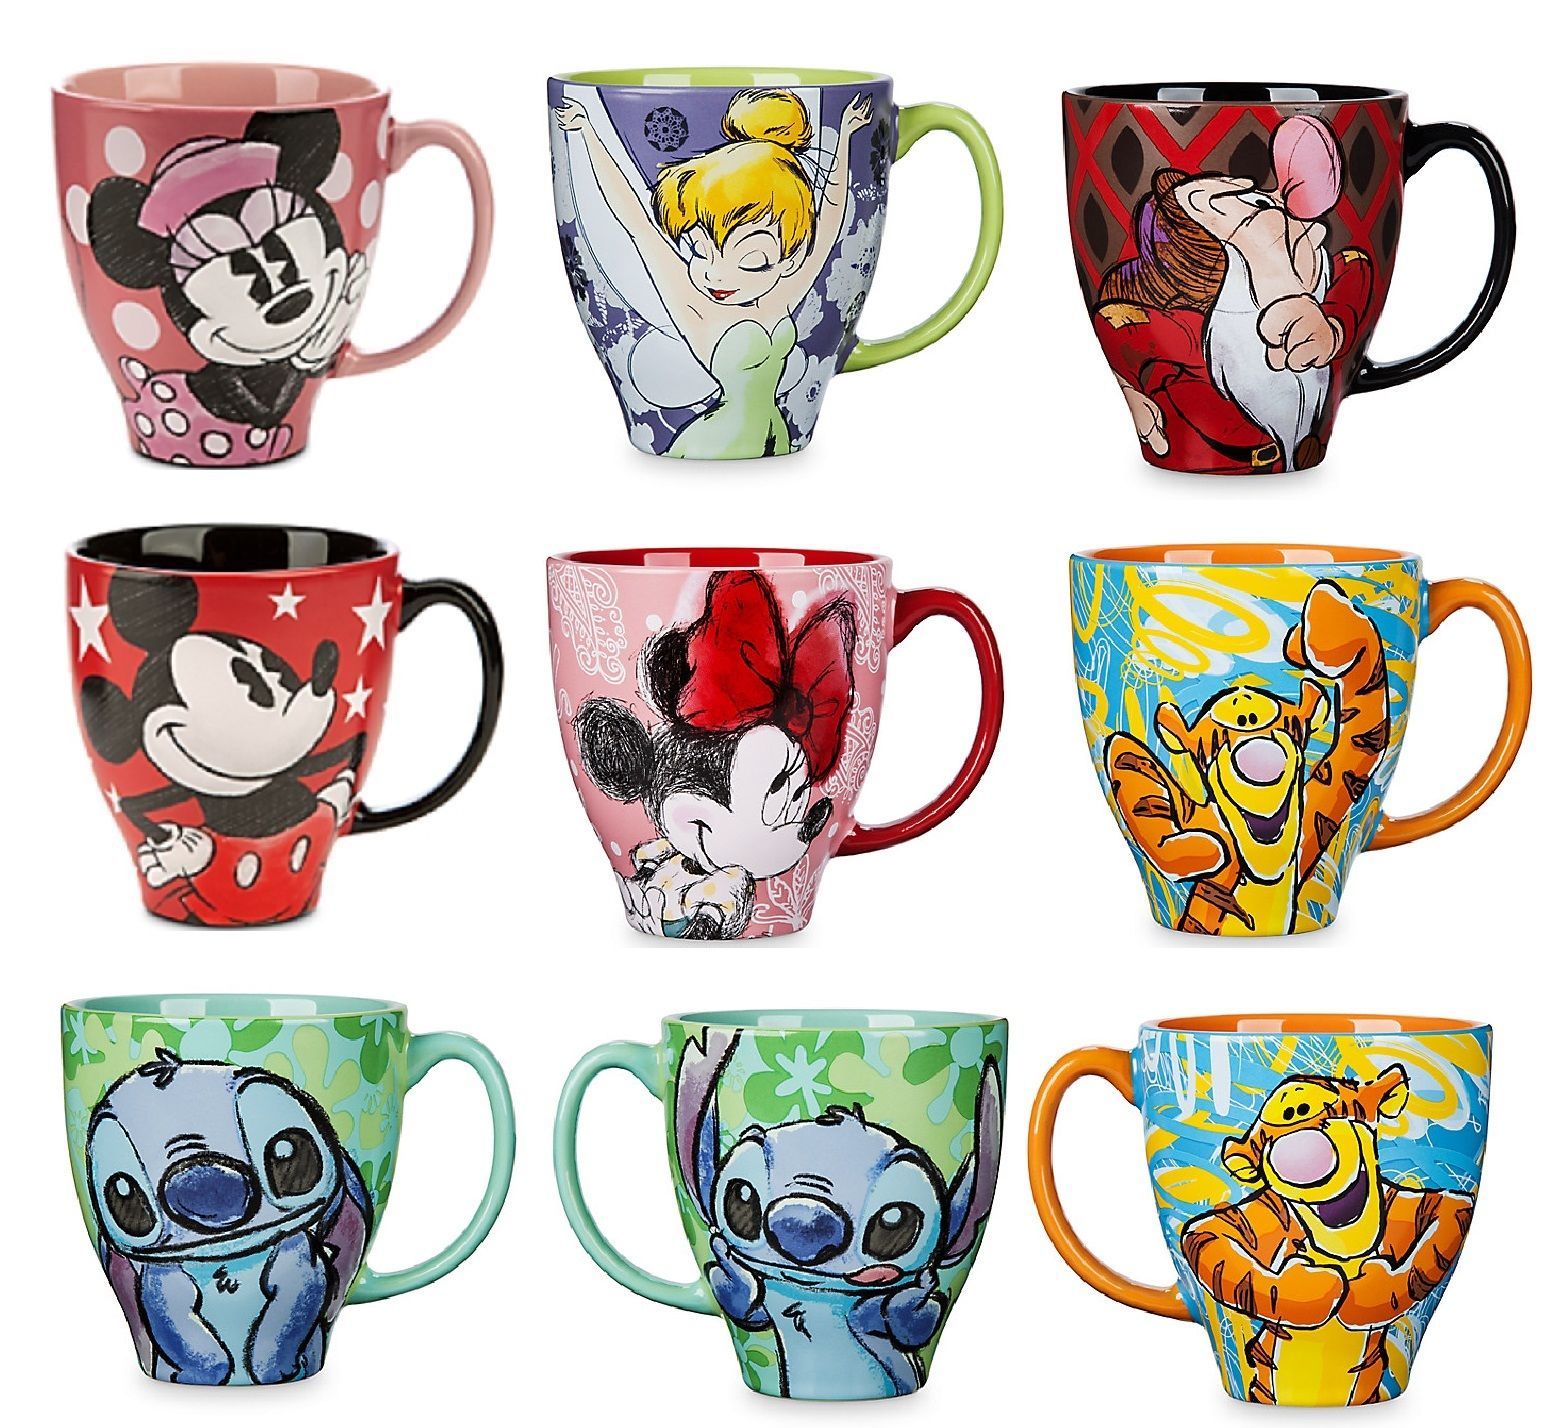 Disney Coffee Cup - 2017 Sorcerer Mickey Mouse Logo